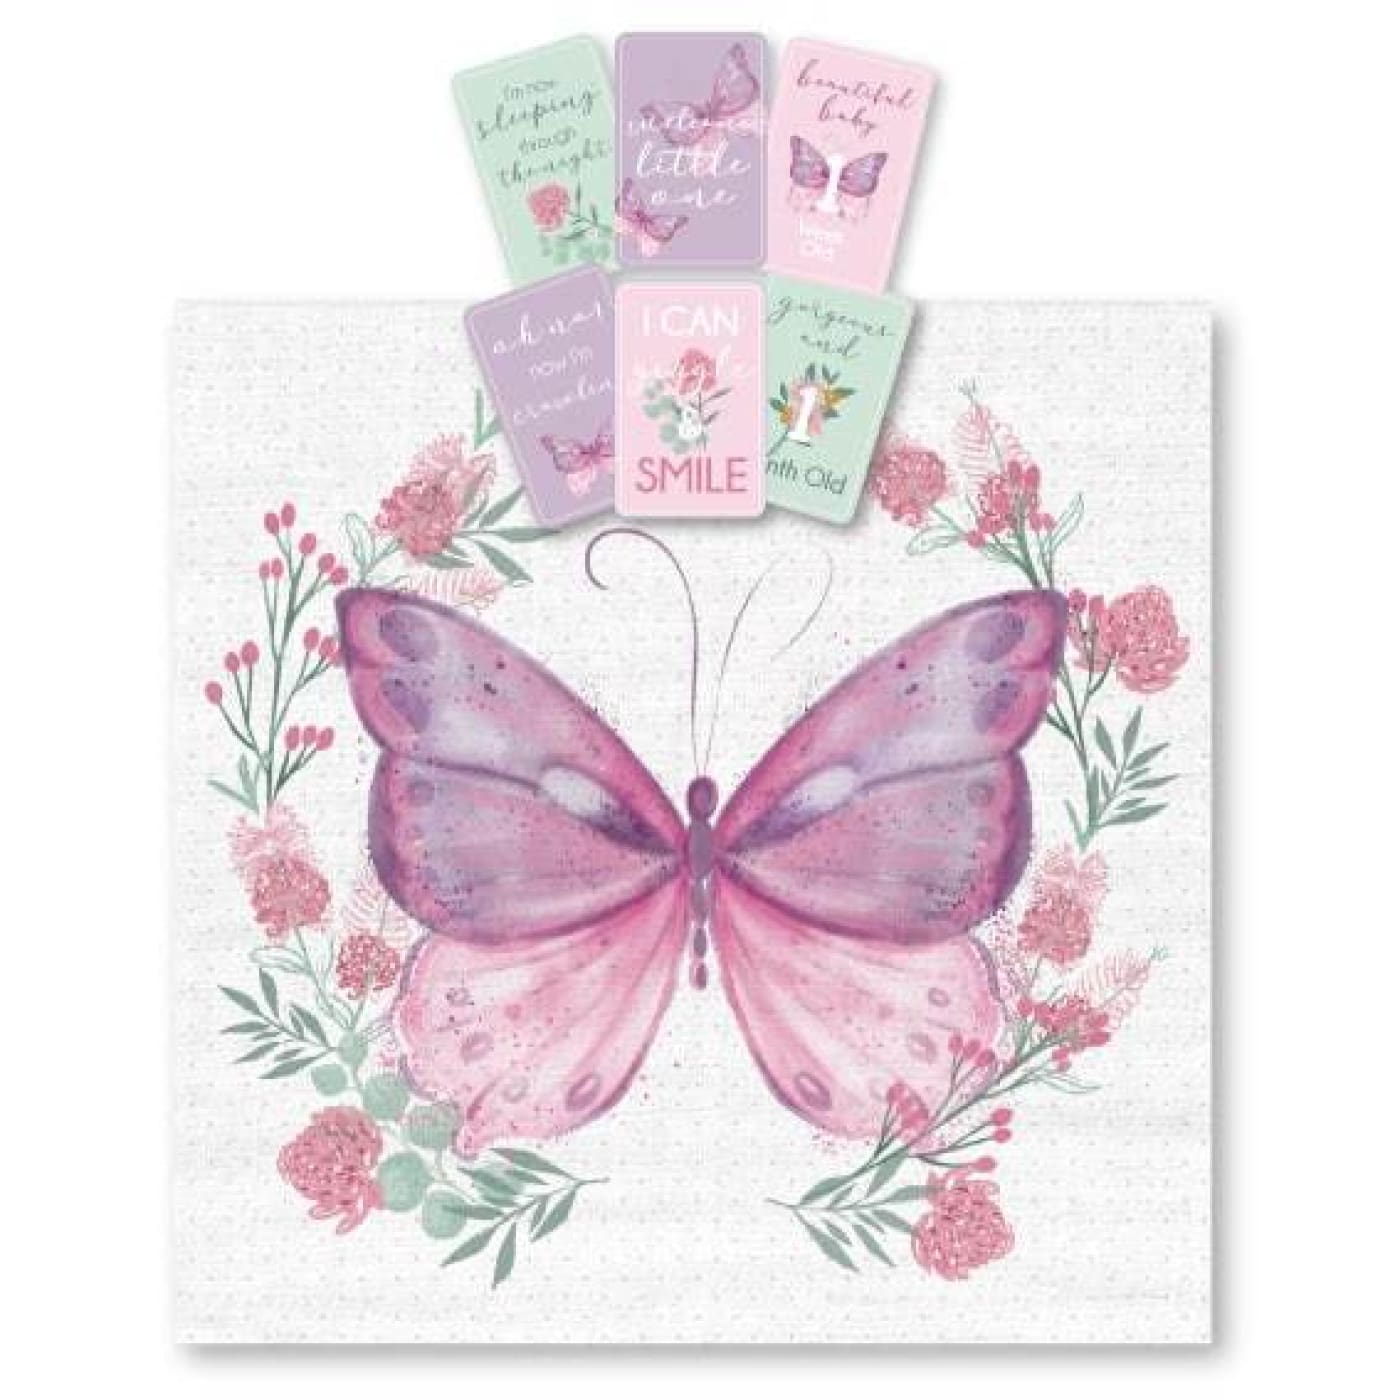 Jiggle & Giggle Milestone Cotton Muslin & Baby Photo Cards - Butterfly - Butterfly - GIFTWARE - MILESTONE BLOCKS/CARDS